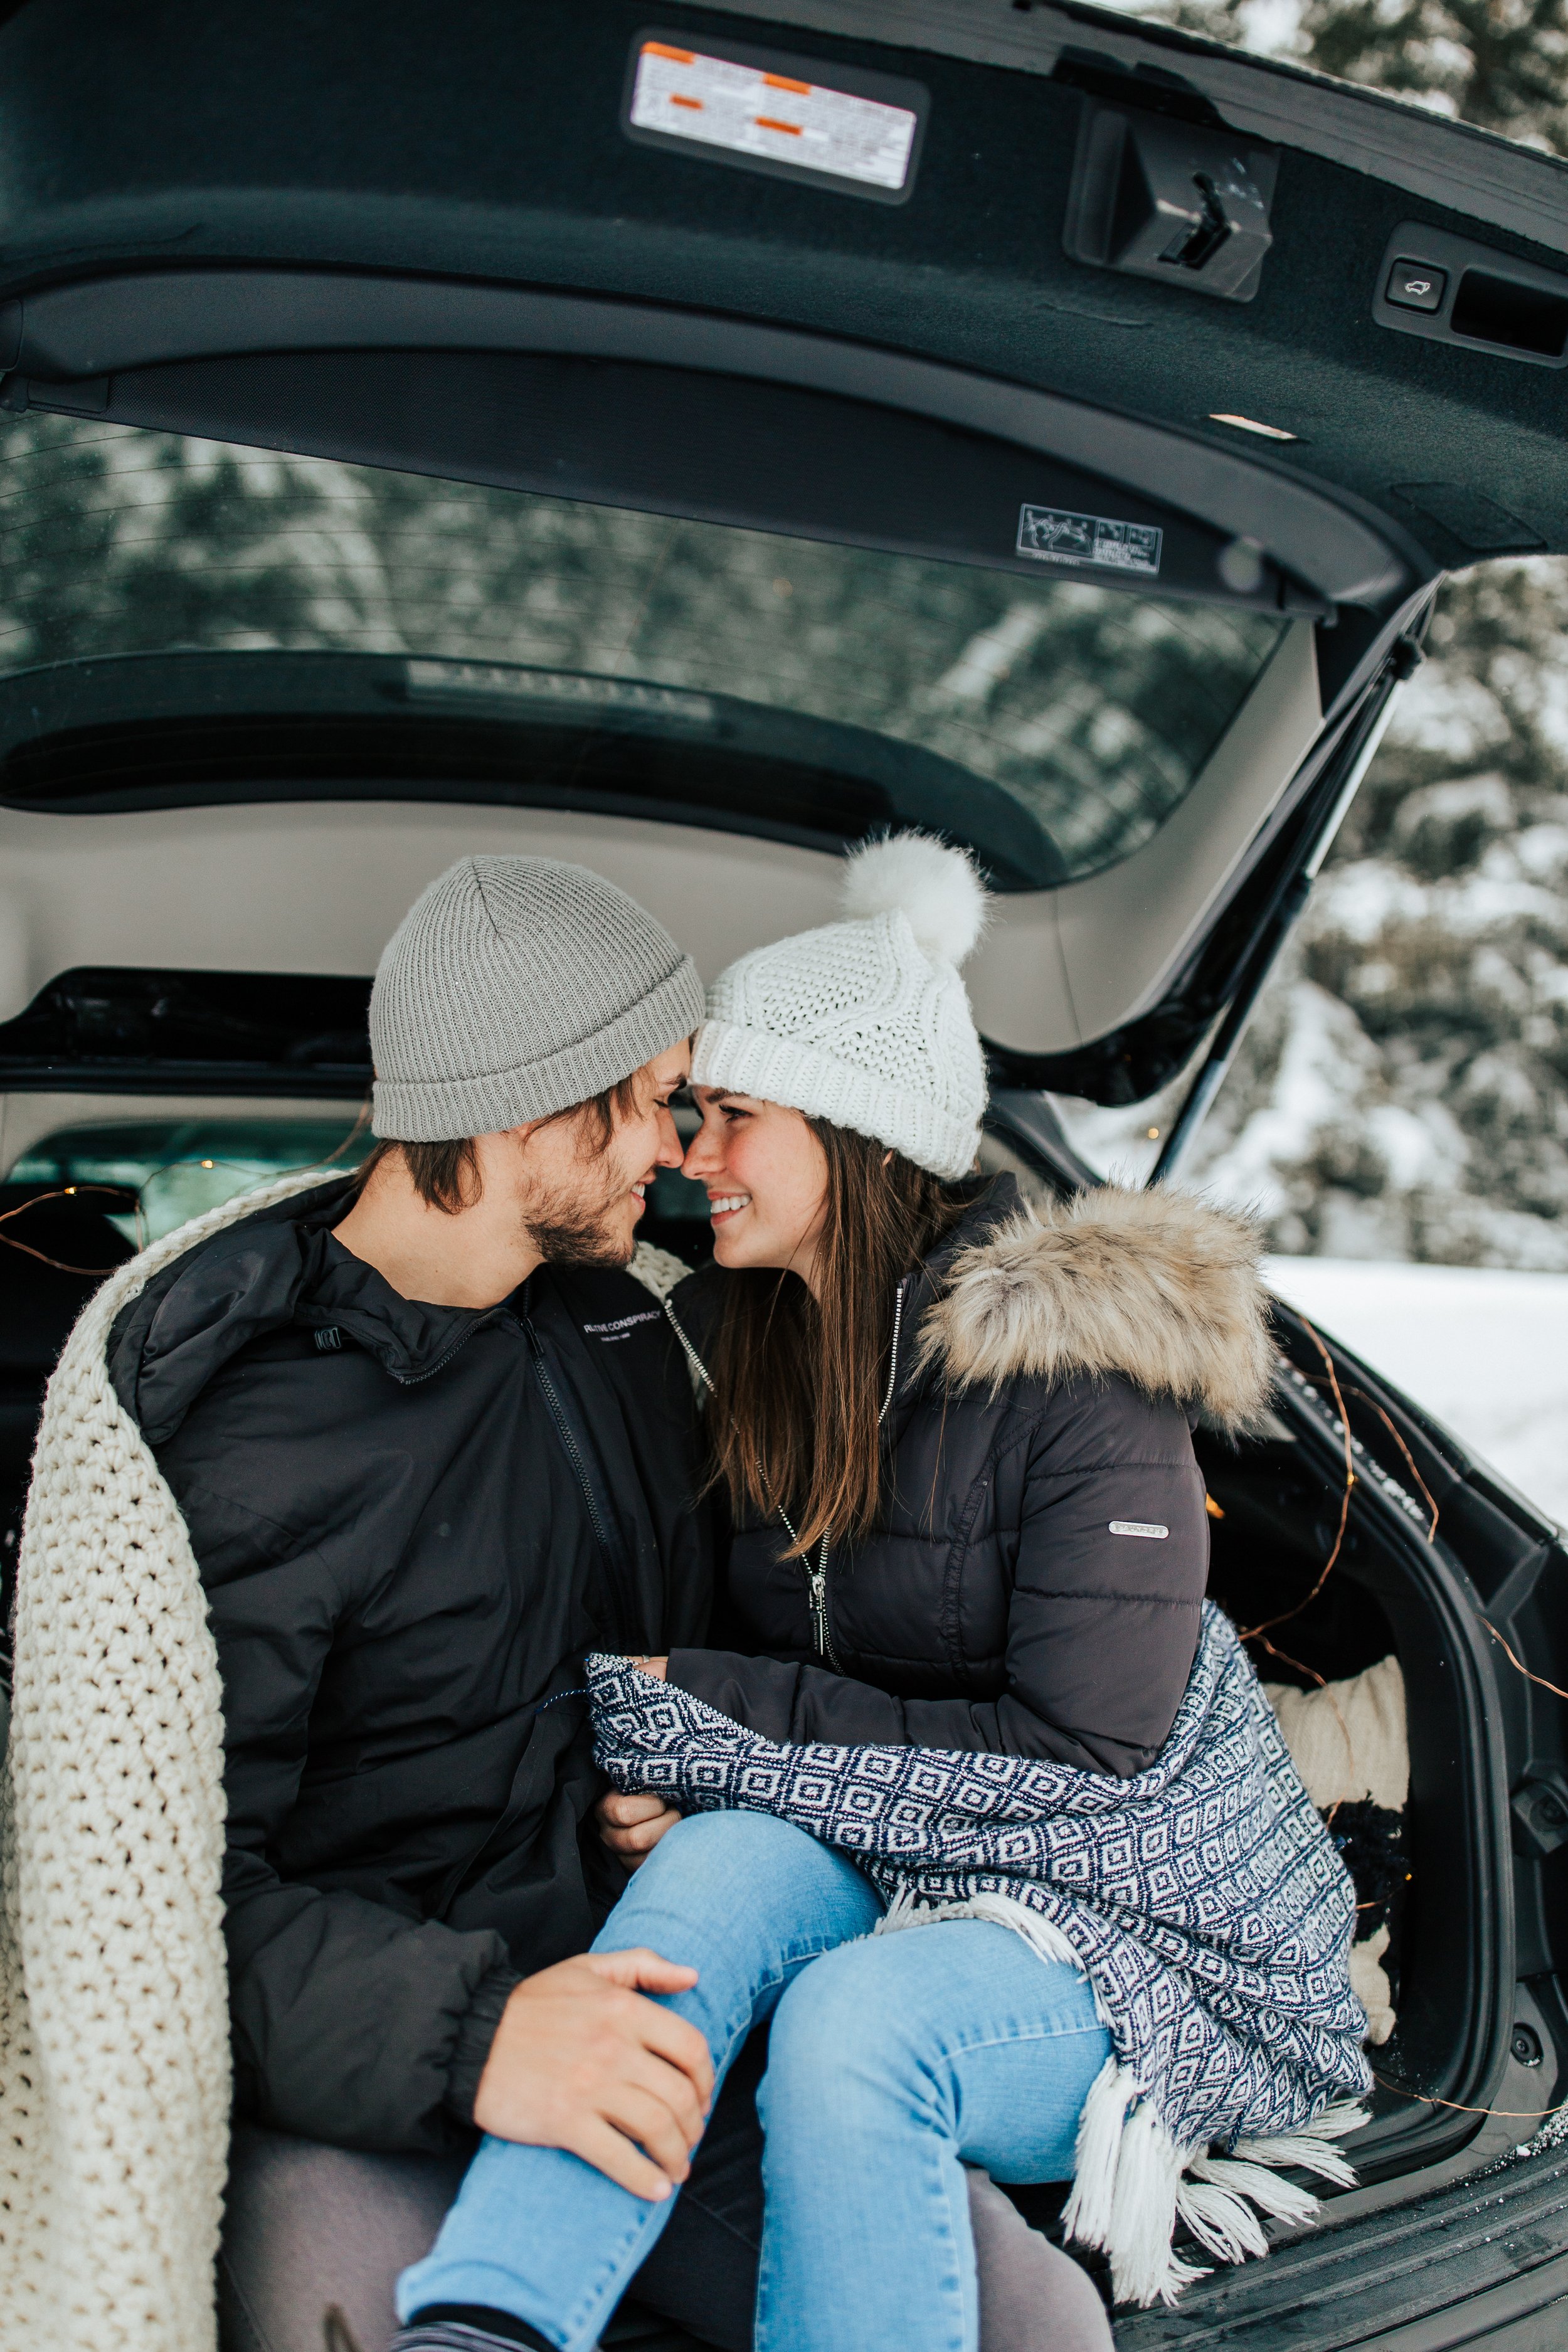  Winter photoshoot outfit inspo. Man and woman kiss in the snowy mountains wearing coats and beanies. Utah mountain engagement shoot in the winter. Salt Lake City, Utah photographer. #winter #engagements #engagementsession #utahphotoshoot #utahengage